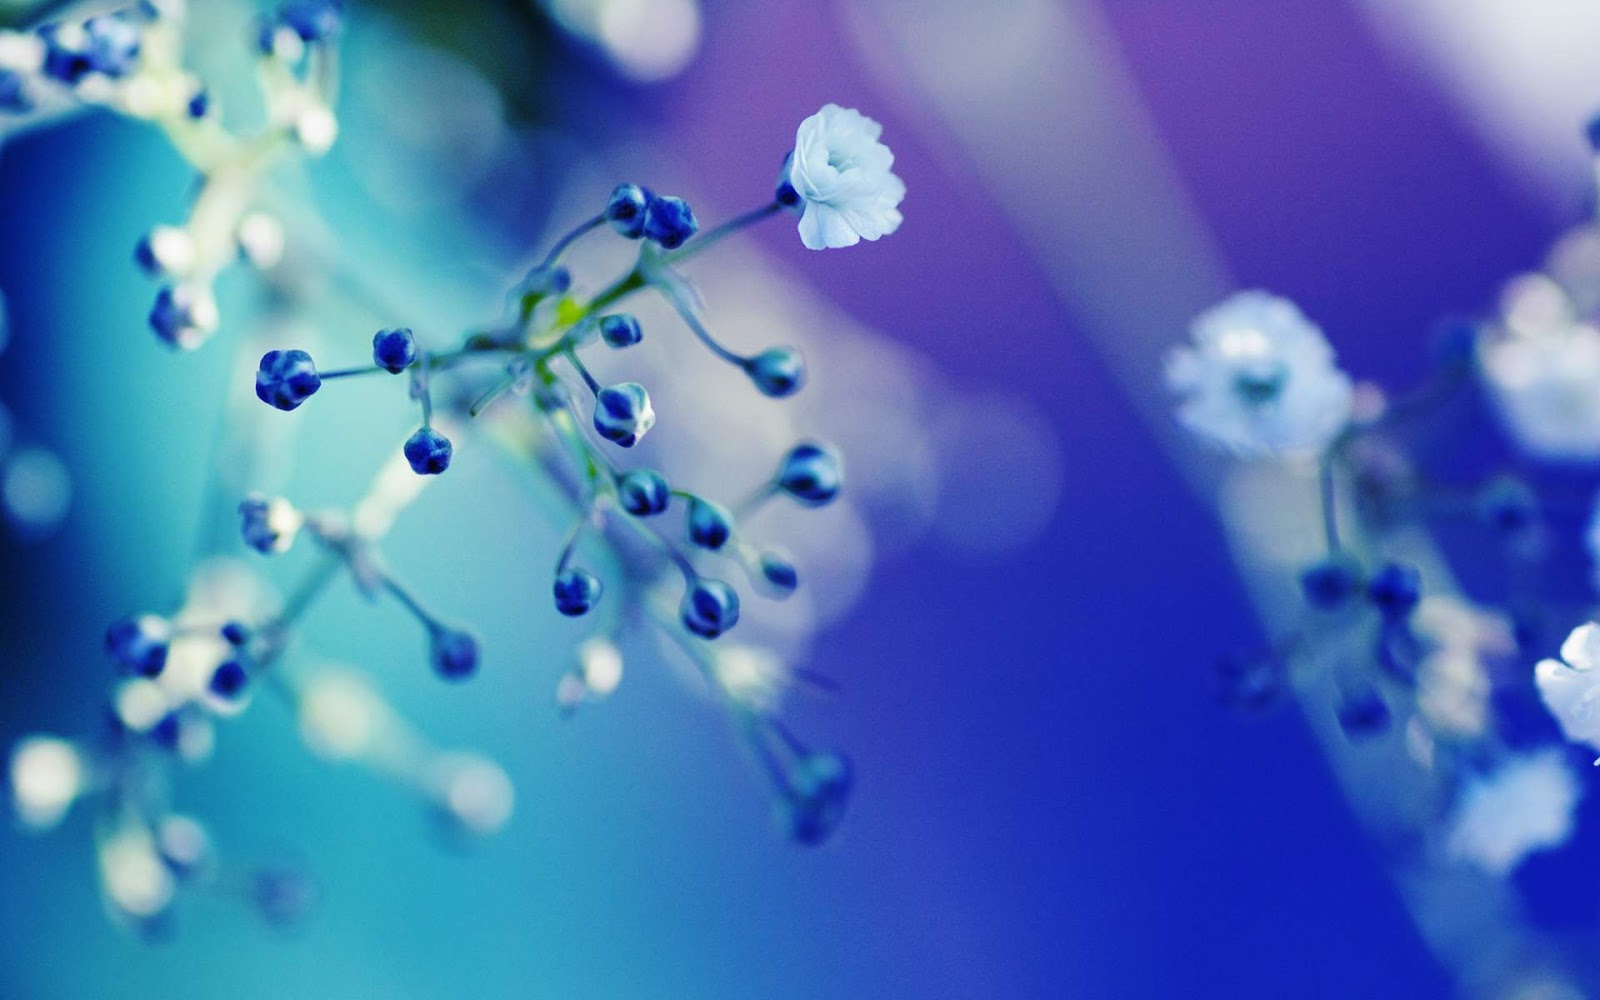 Blue Flowers Close Up Wallpapers Amazing Wallpapers